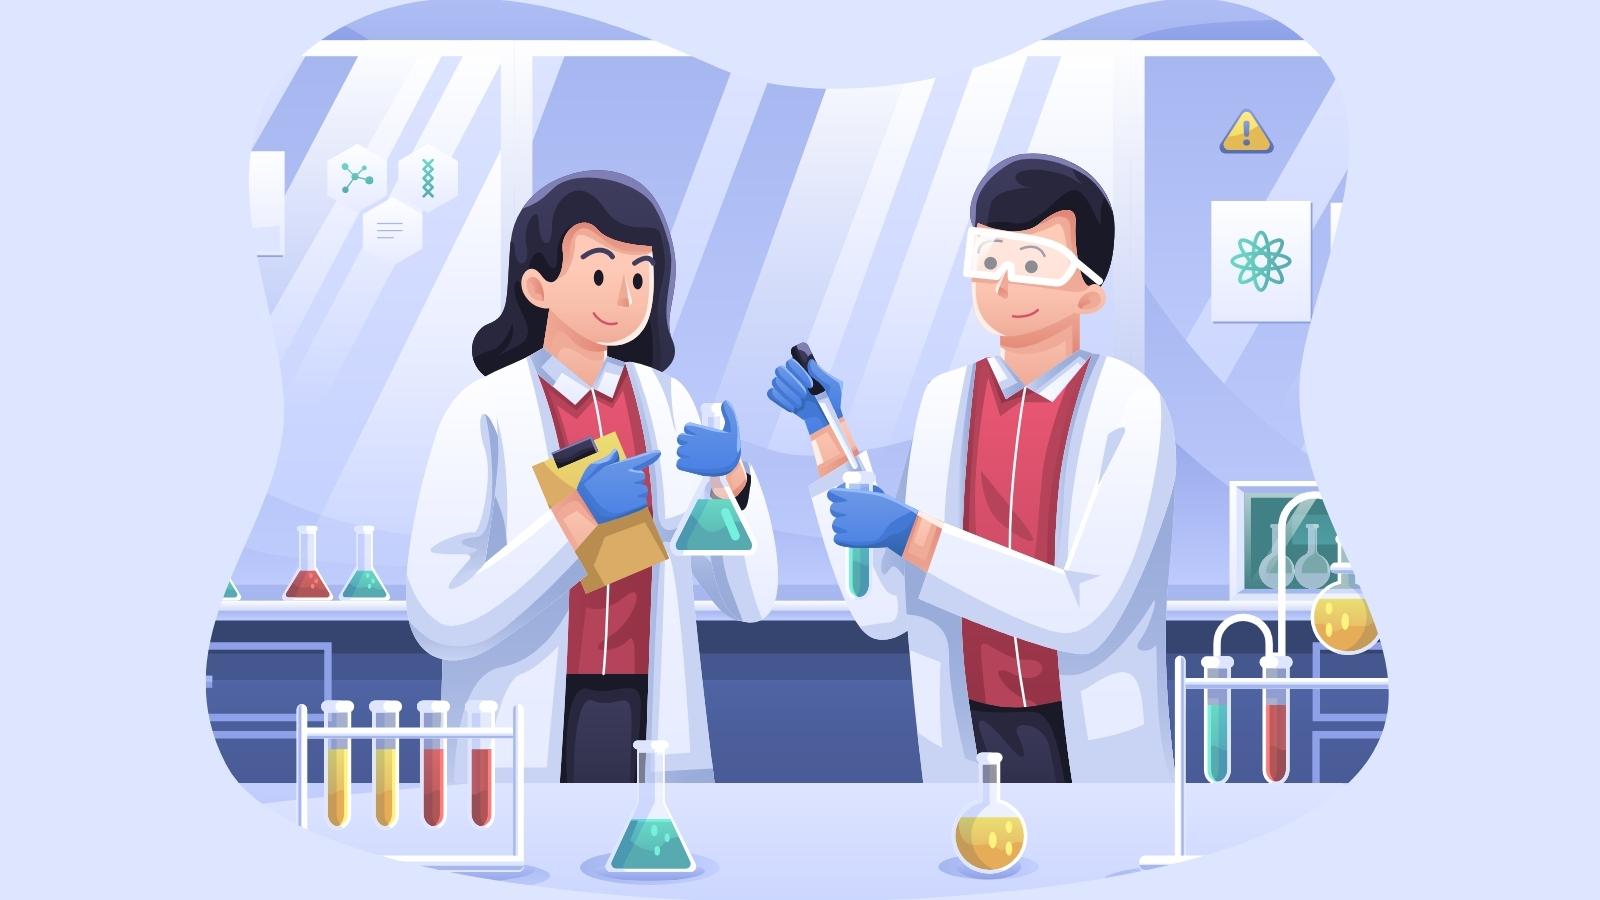 Lab Technician Jobs Animation Of Researcher Doing Experiments